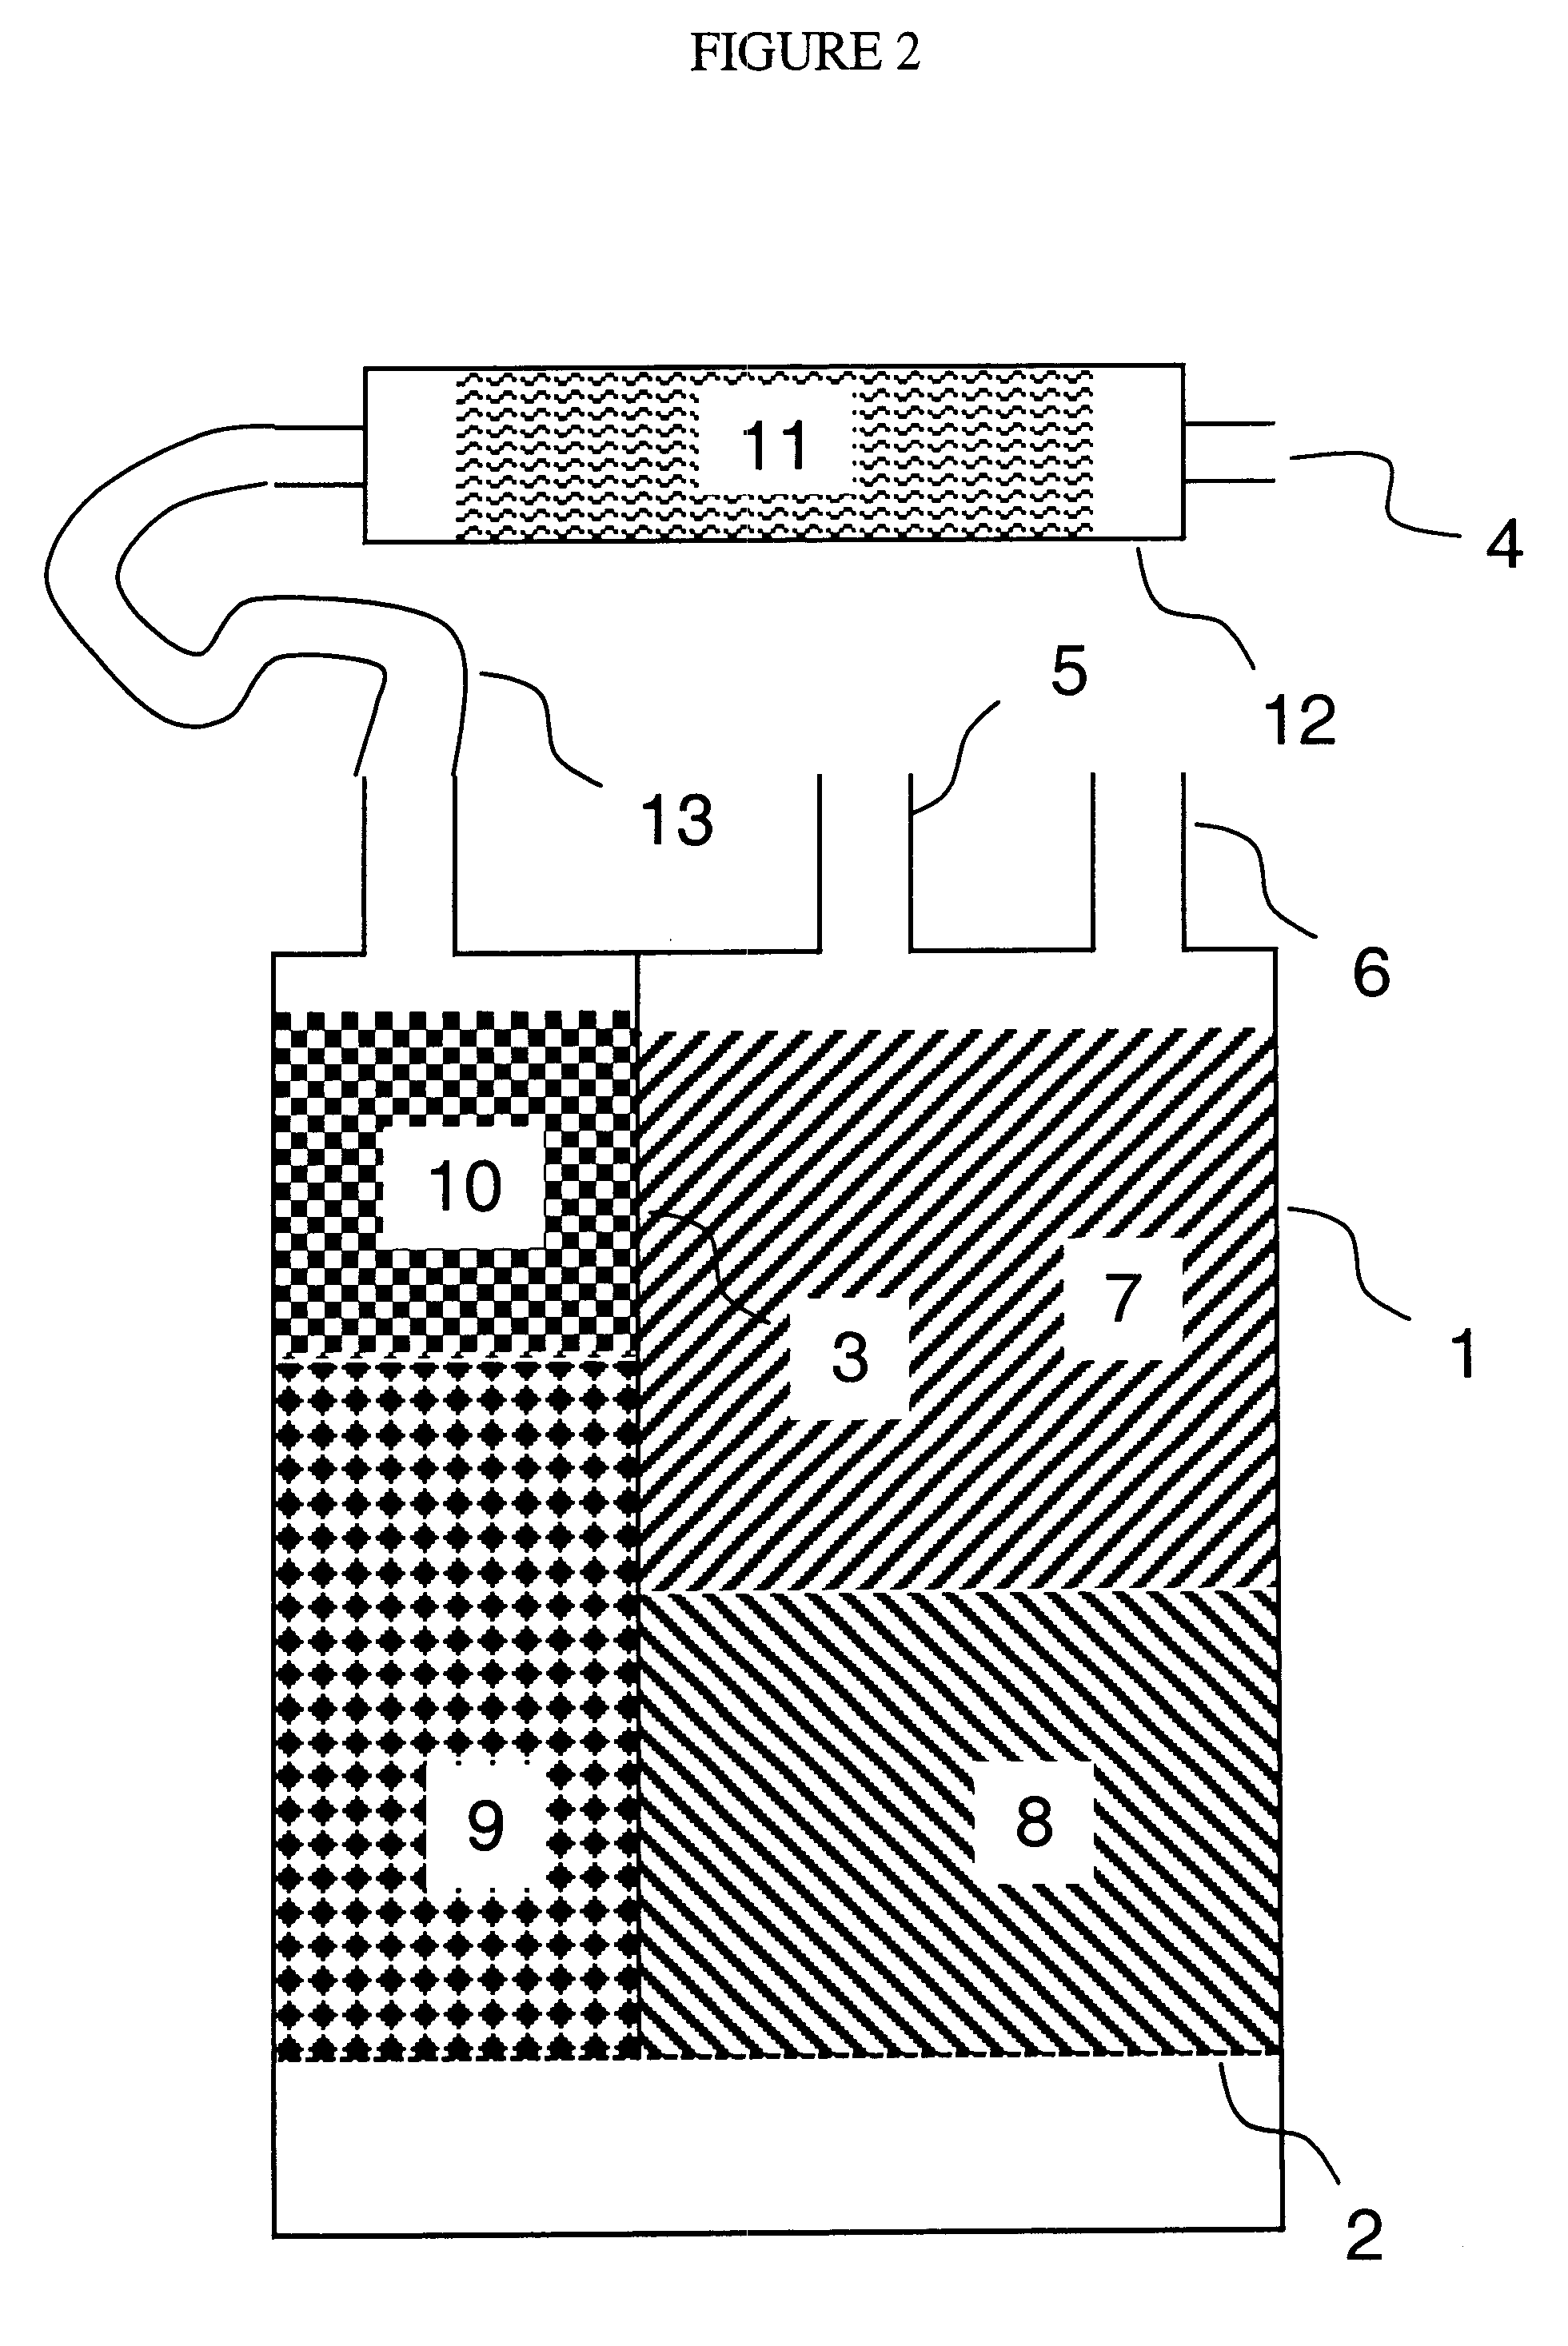 Method for reducing emissions from evaporative emissions control systems